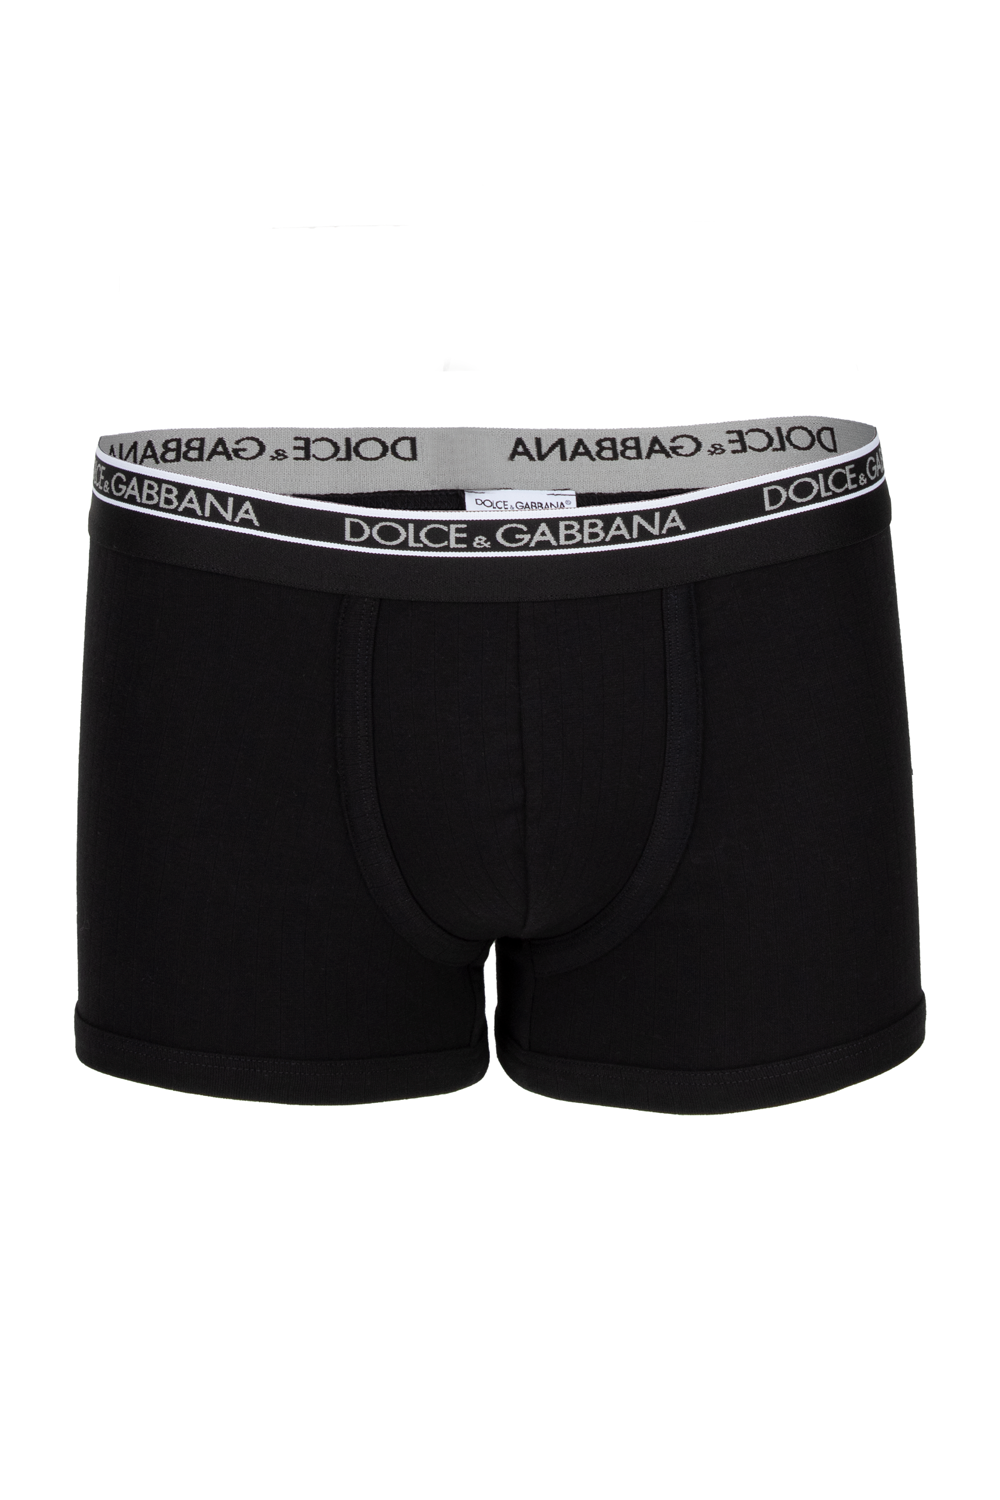 DOLCE & GABBANA WIDE RIBBED BOXERS